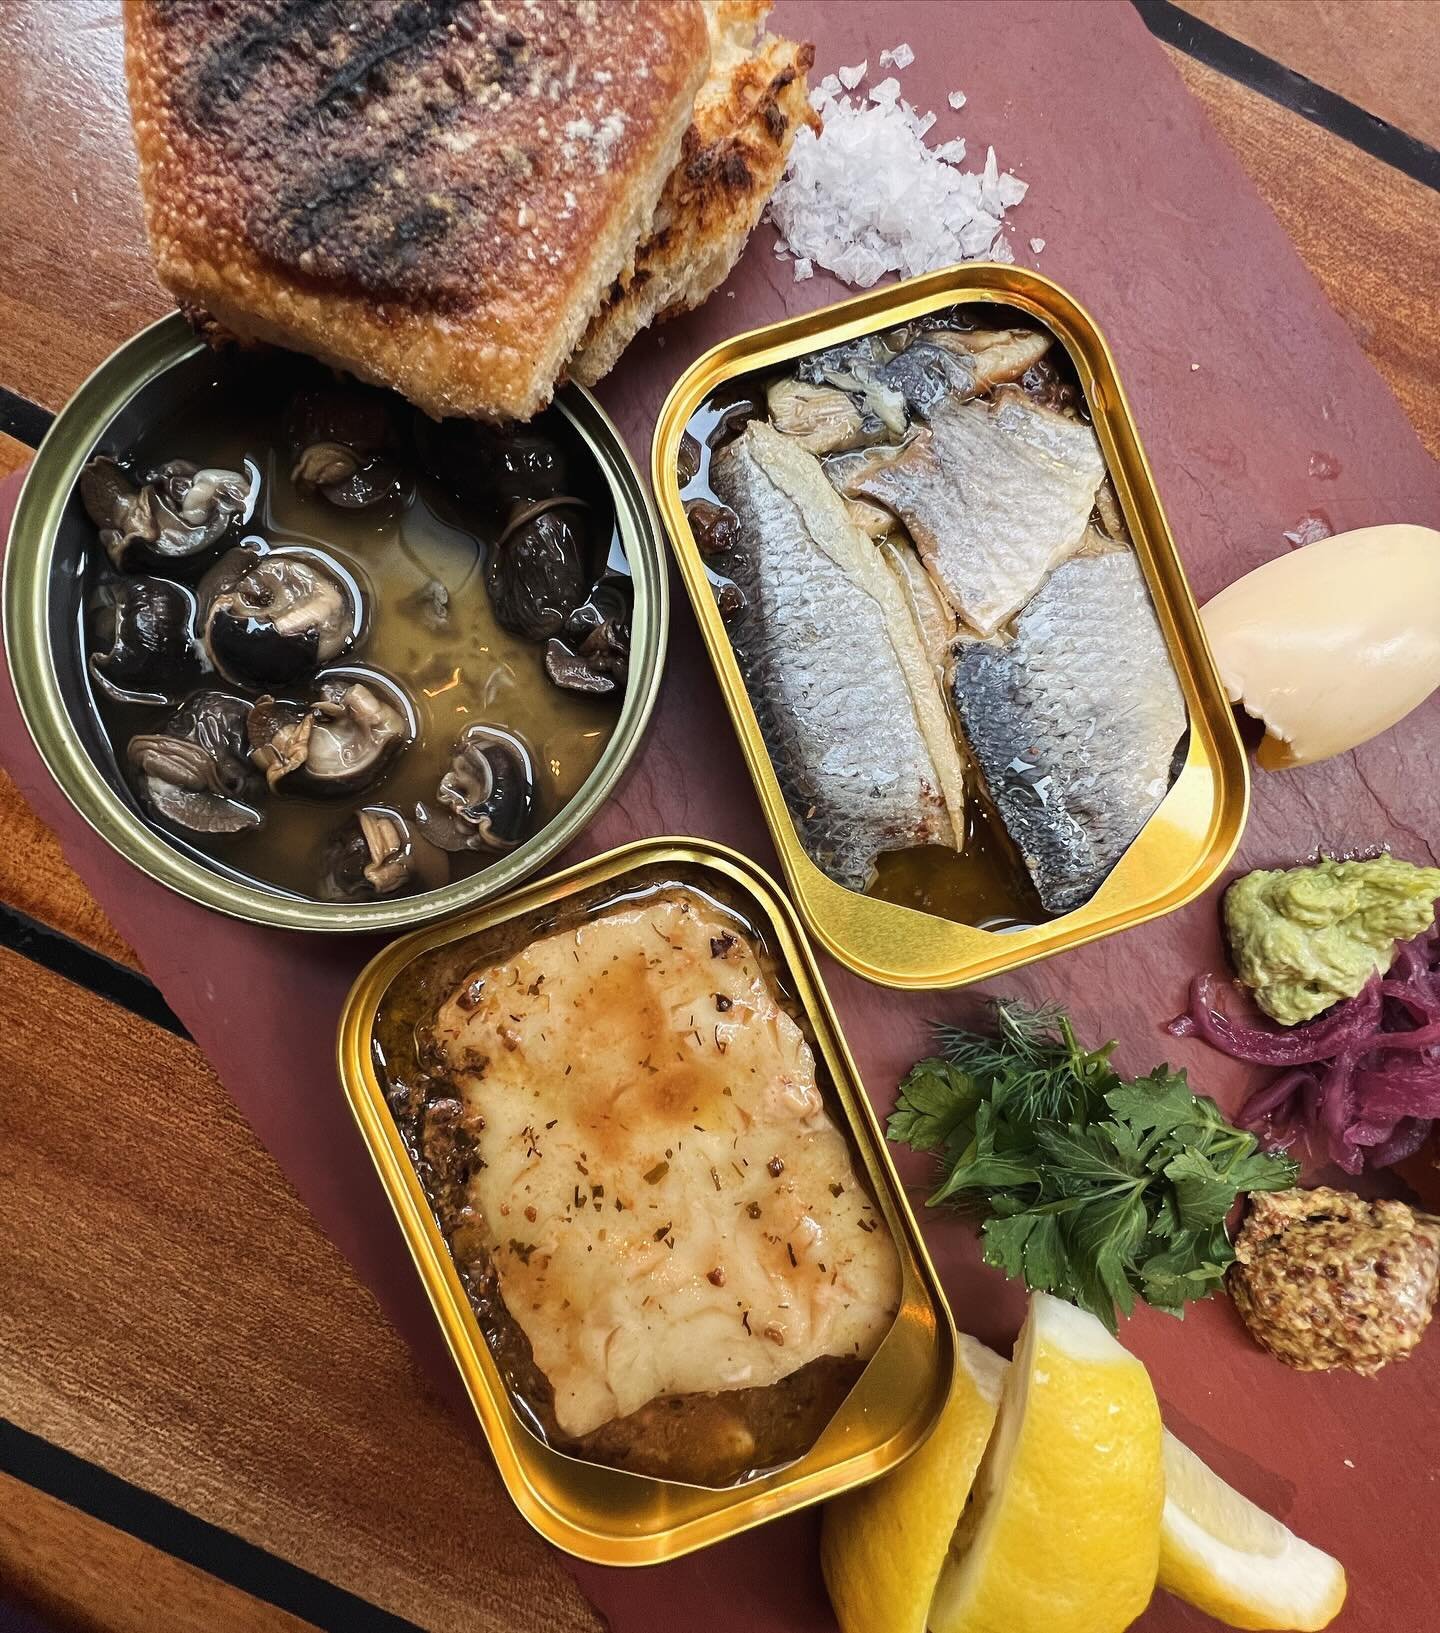 One fish, two fish, red fish, blue fish.....

New tins from Denmark &amp; Greece hit the menu last week and #damngina they are divine - introducing @havsmag pollack &amp; herring fillets in seaweed pesto, as well as @minnowworld snails in brine 🐌 - 